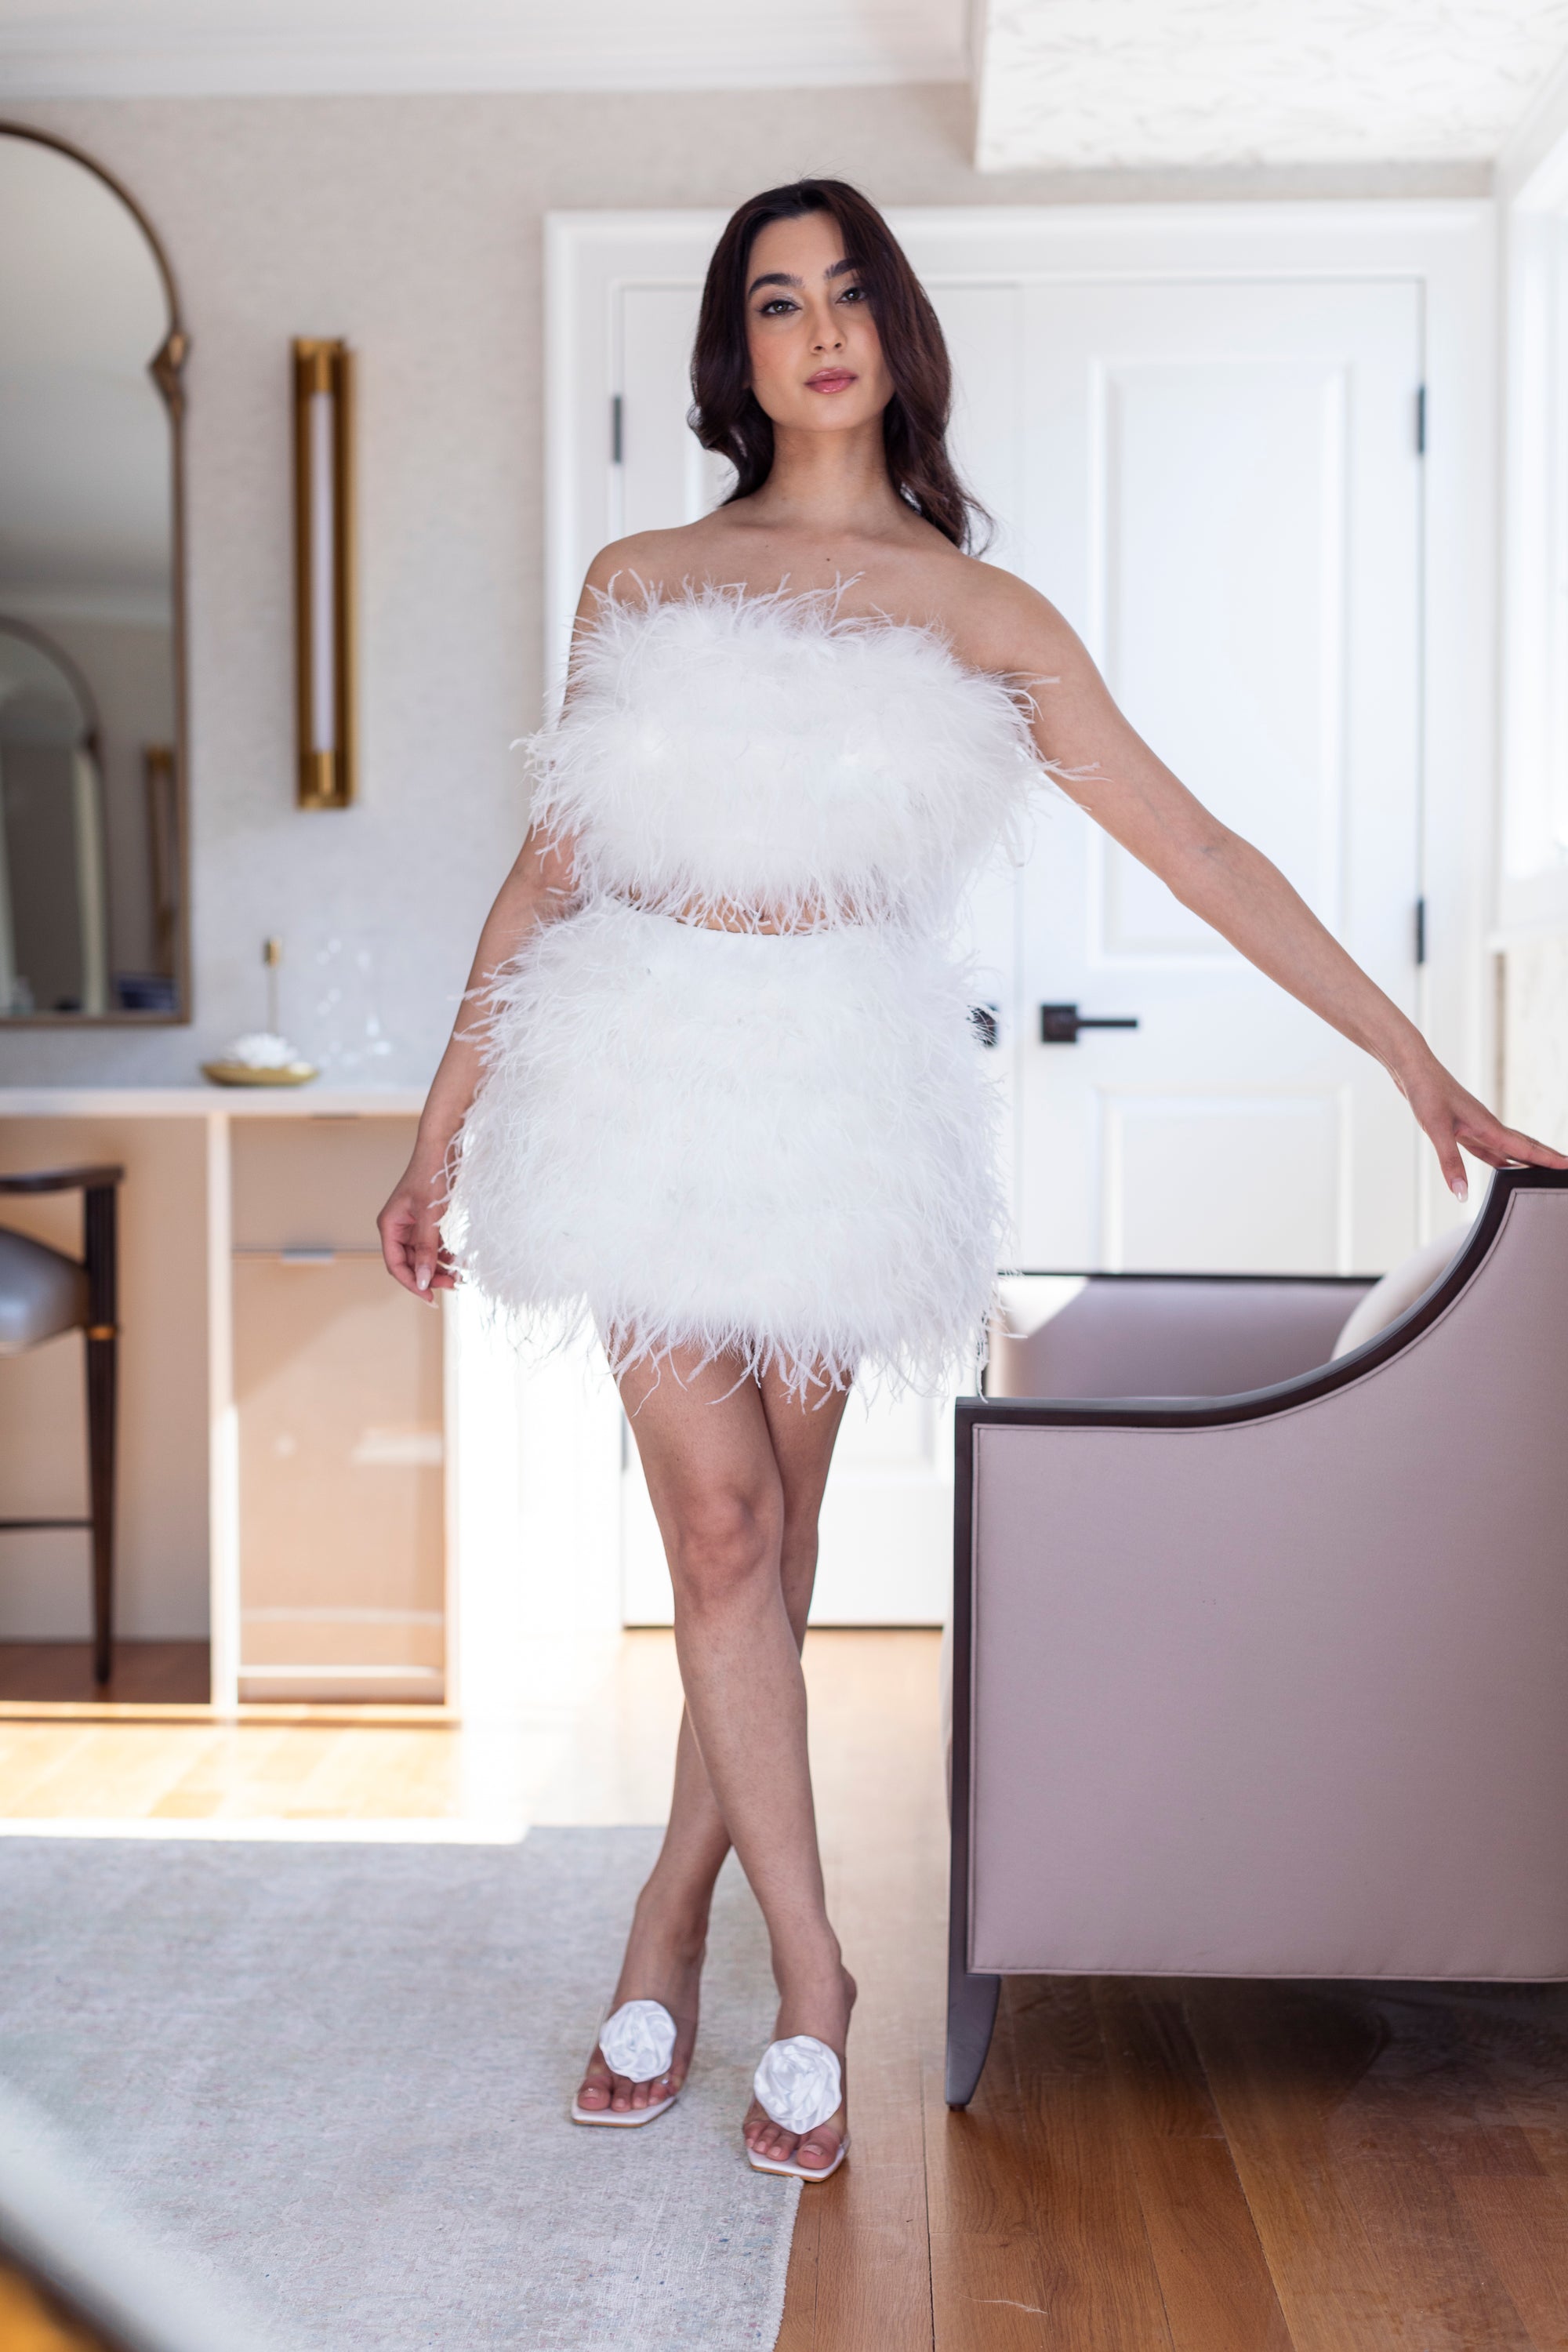 Olivia Ostrich Feather Top